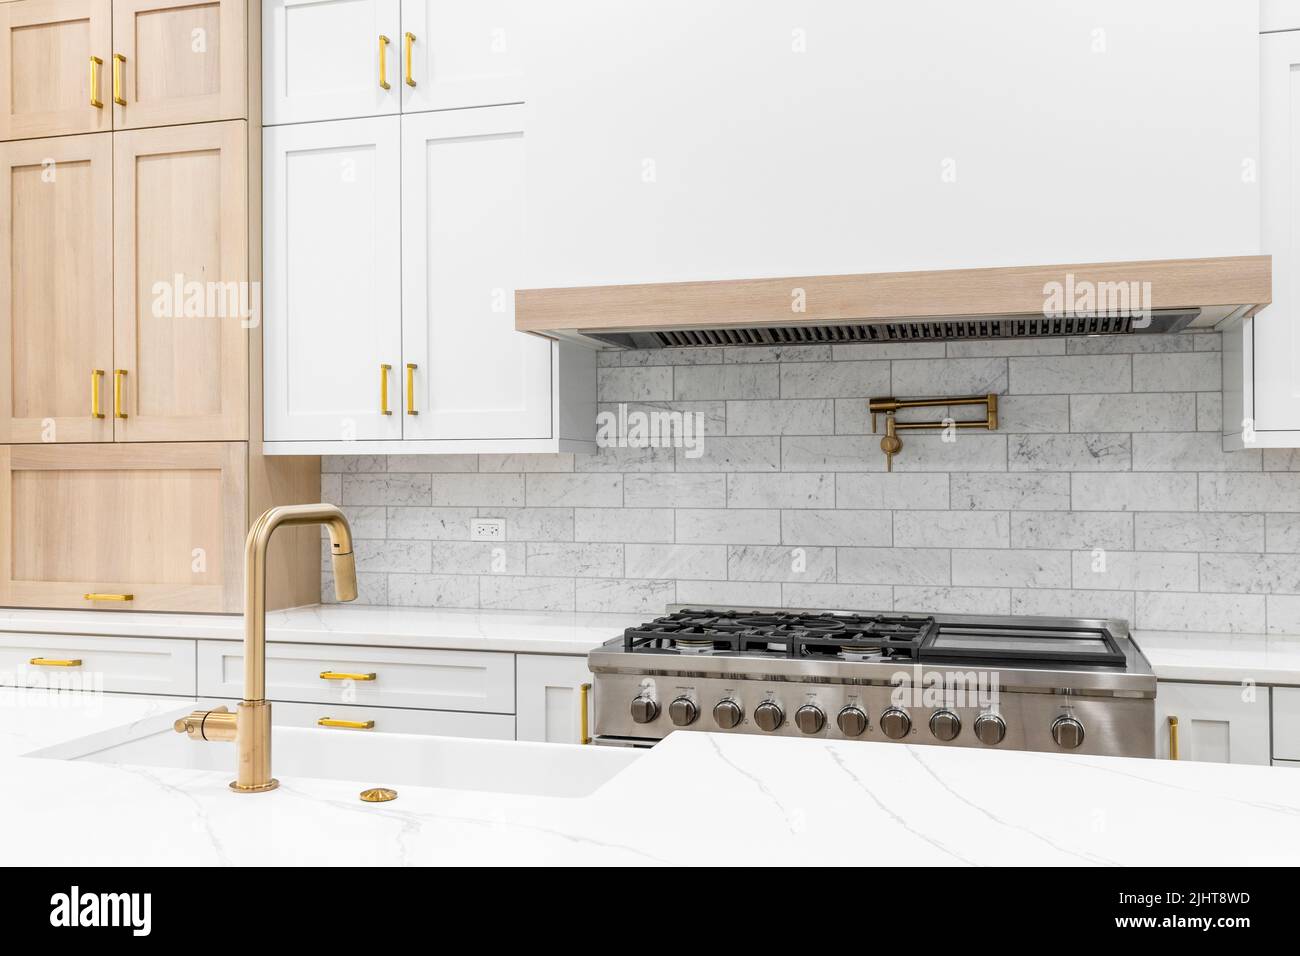 A kitchen detail shot with a gold faucet, white and wood cabinets, marble countertop, and subway tile backsplash. Stock Photo